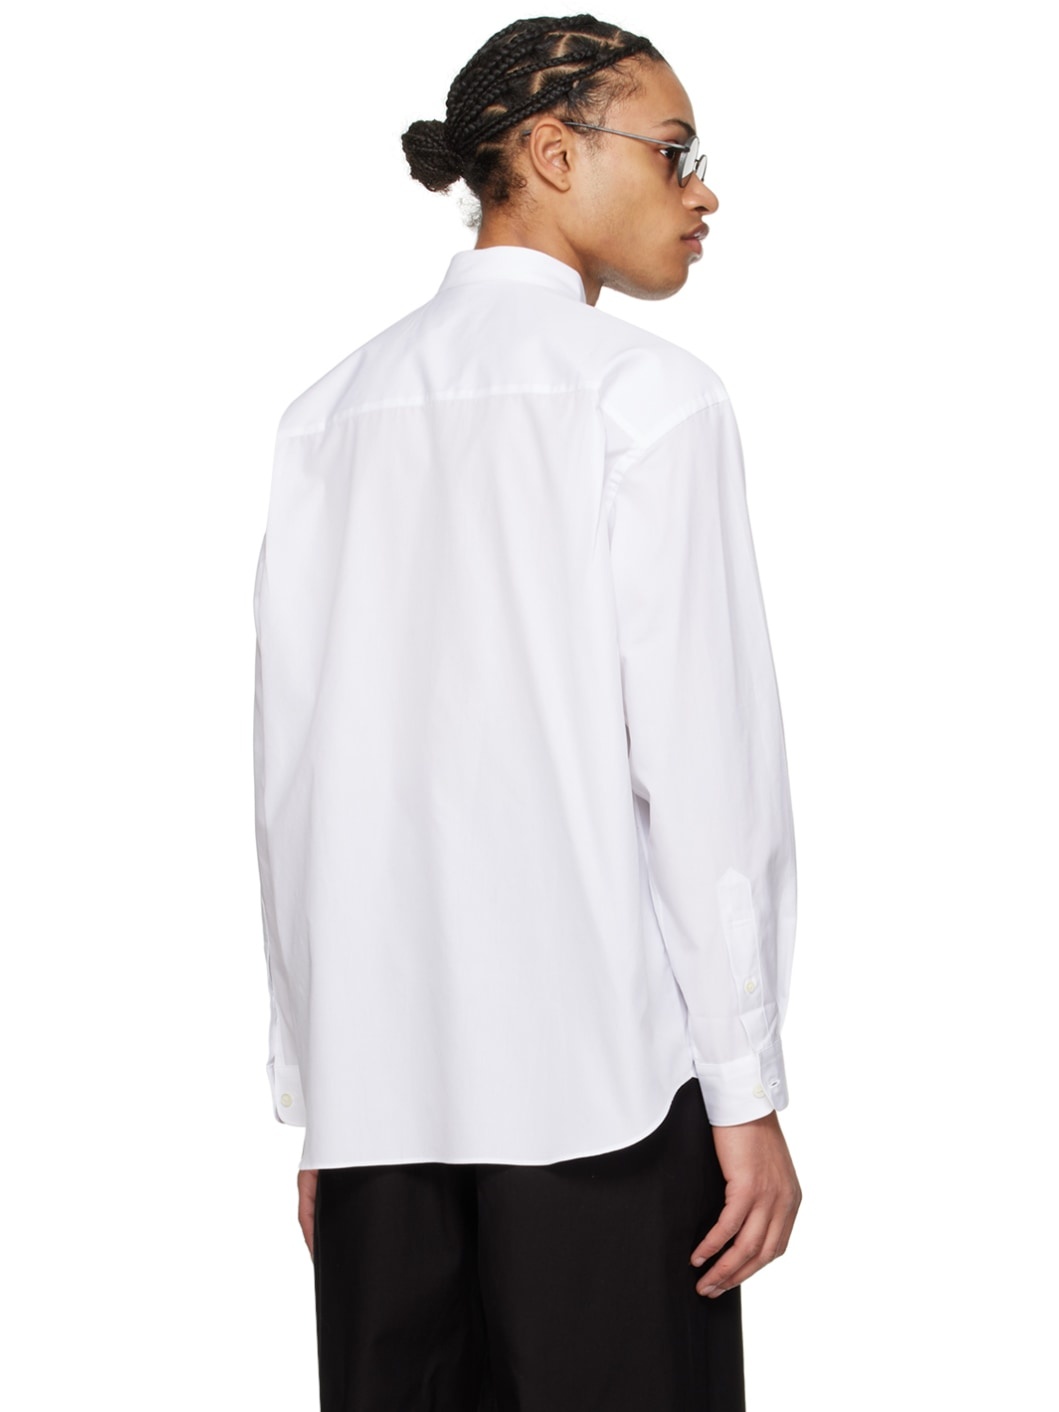 White Embroidered Shirt - 3